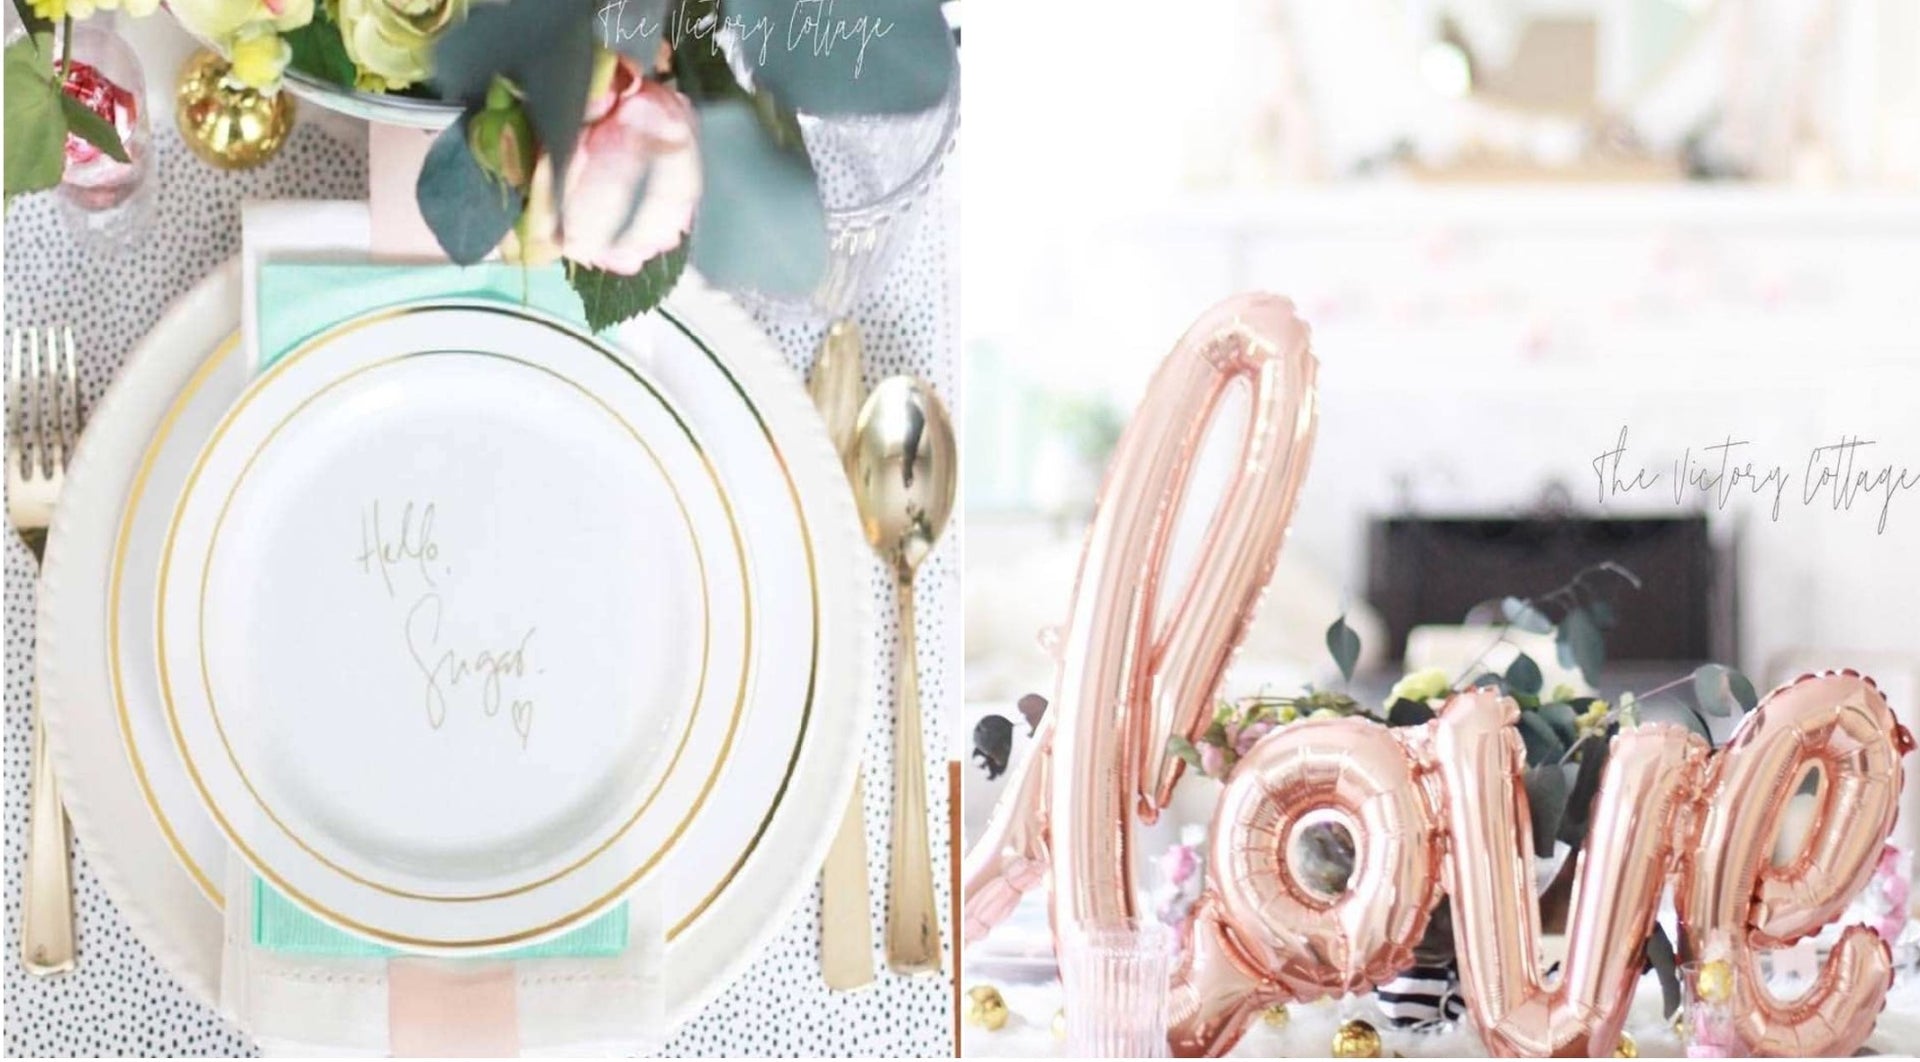 Tablescaping Love: Creating a Stunning Setting for Valentine's Day